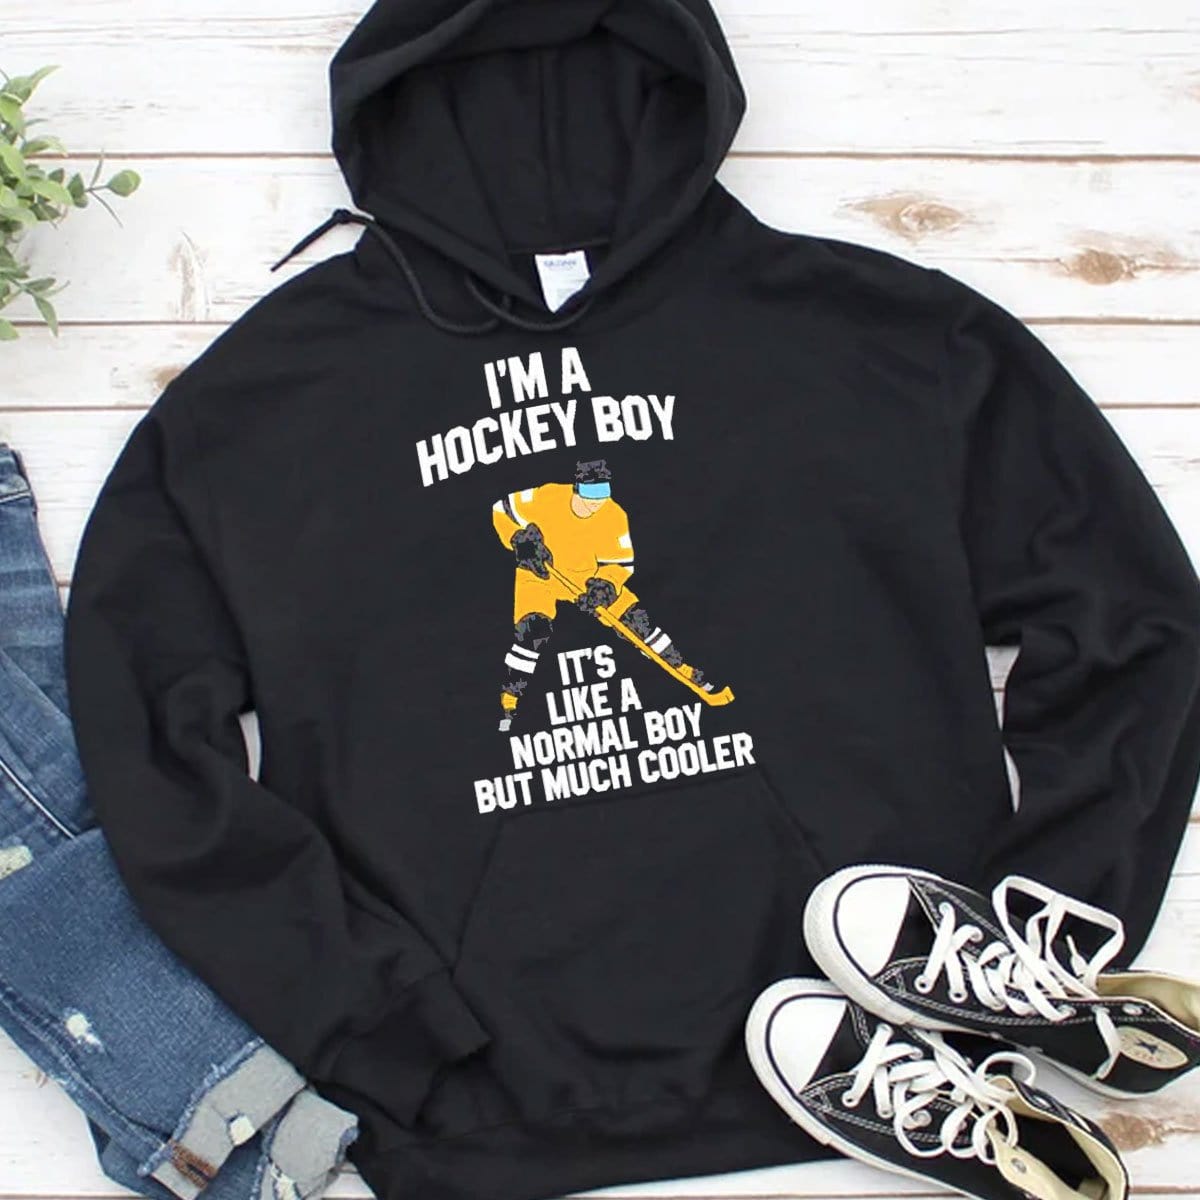 I'm A Hockey Boy It's Like A Normal Boy But Much Cooler Hoodie, Shirts